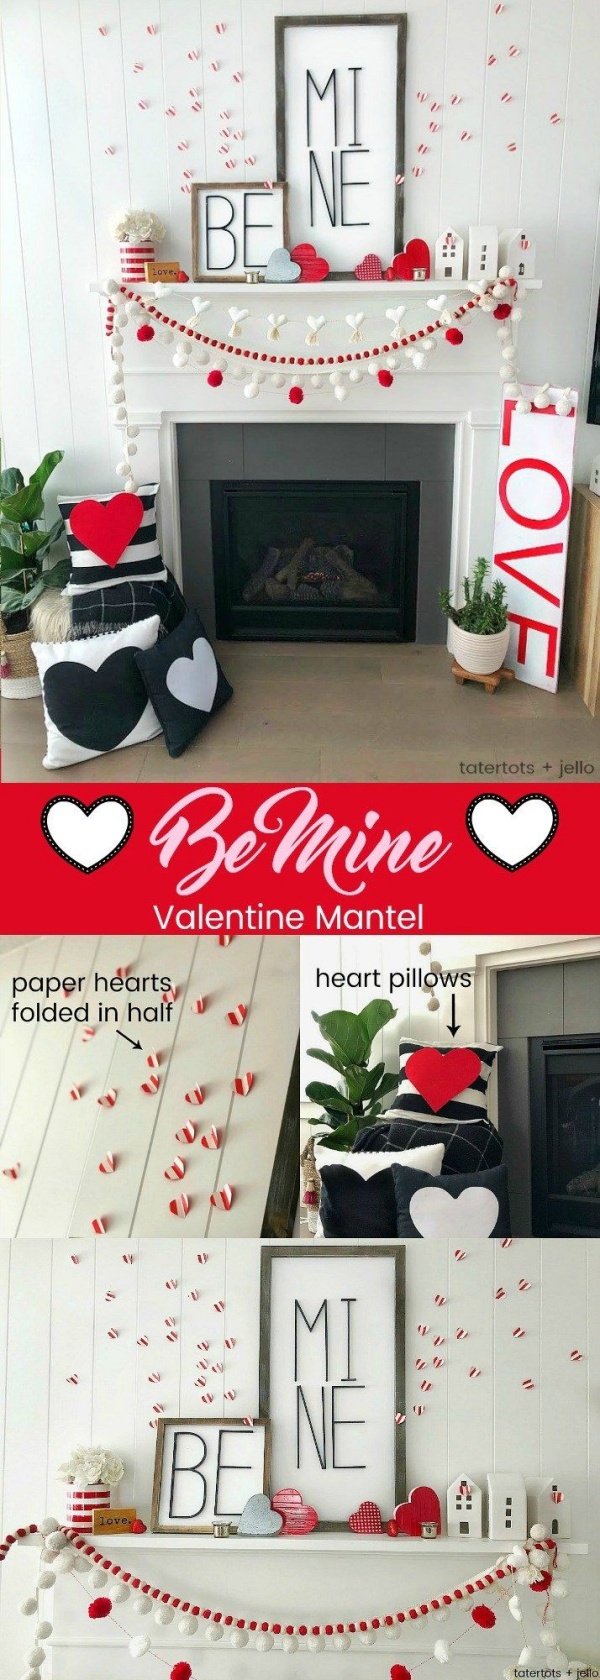 Stunning And Romantic Valentine's Day Decorations Ideas